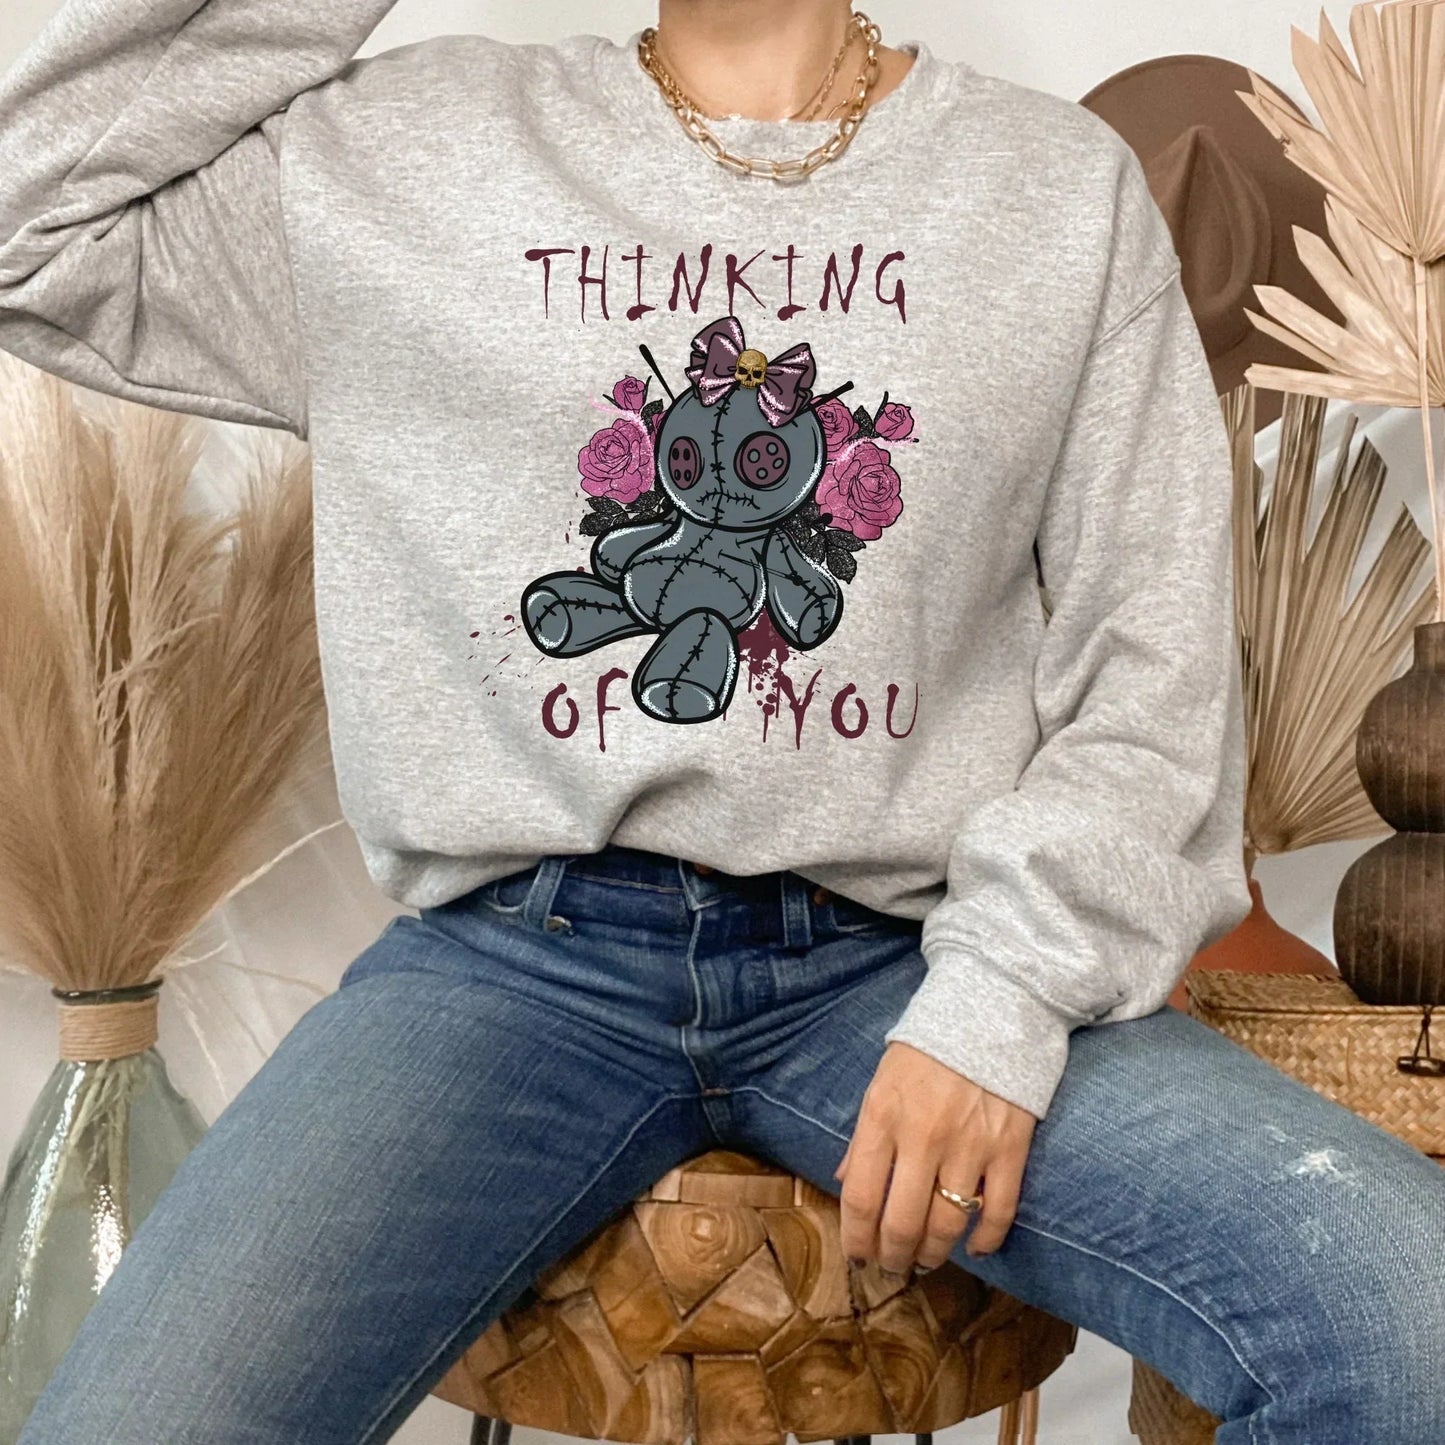 Pastel Gothic Shirt, Witchy Vibes Sweatshirt, Skull Shirt, Goth Style Grunge Shirt, Aesthetic Clothing, Trippy Gift for Her, Witch Tee HMDesignStudioUS